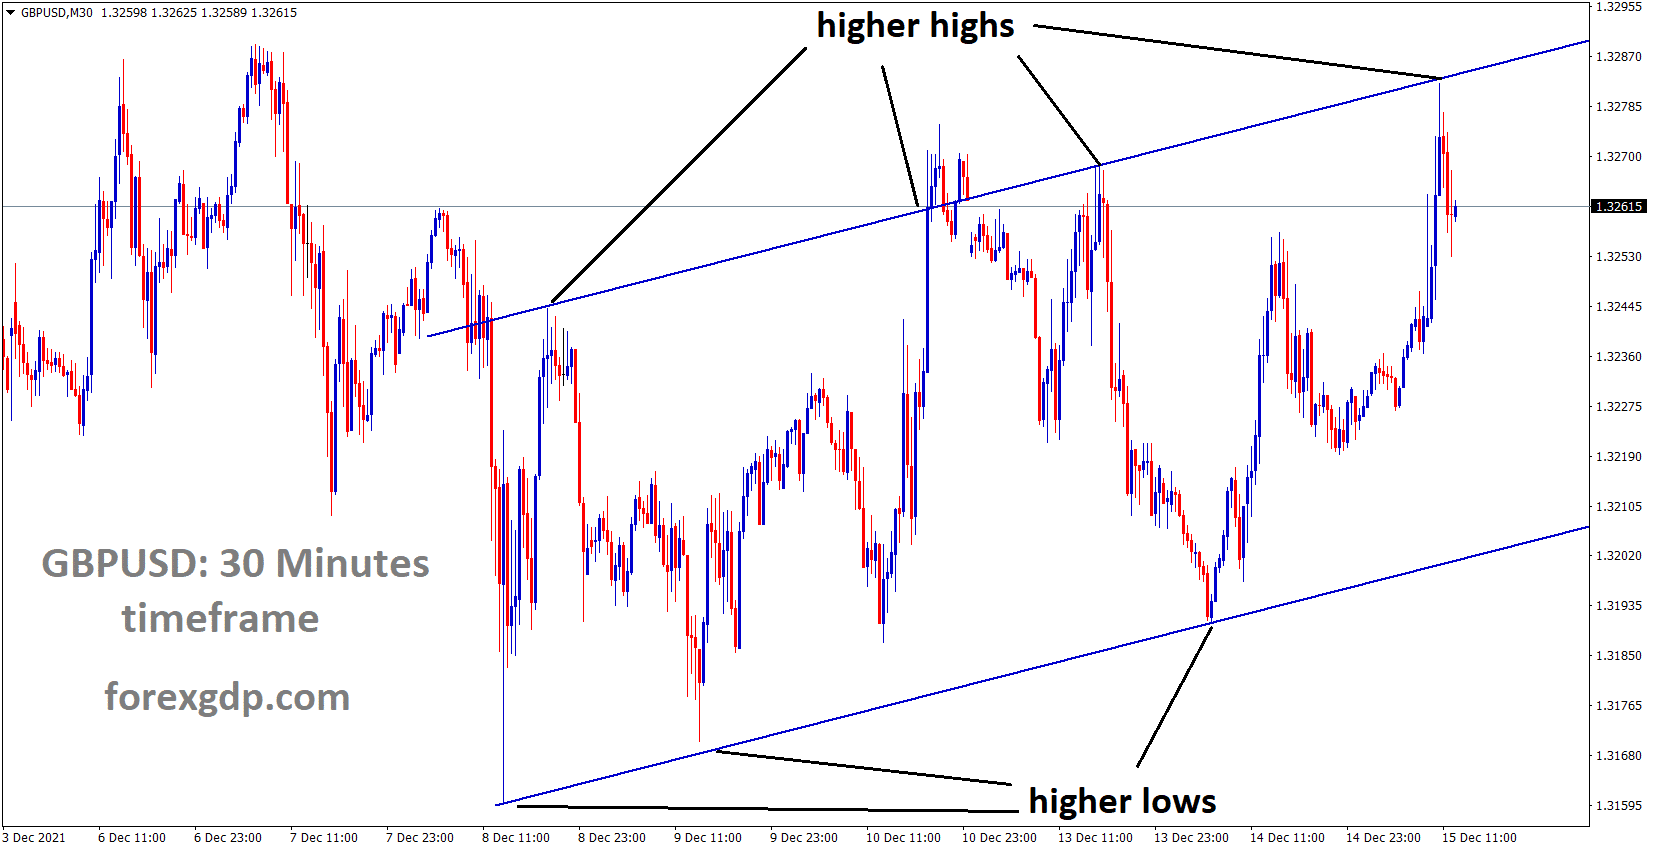 GBPUSD is moving in an Ascending channel and the market fell from the higher high area of the channel